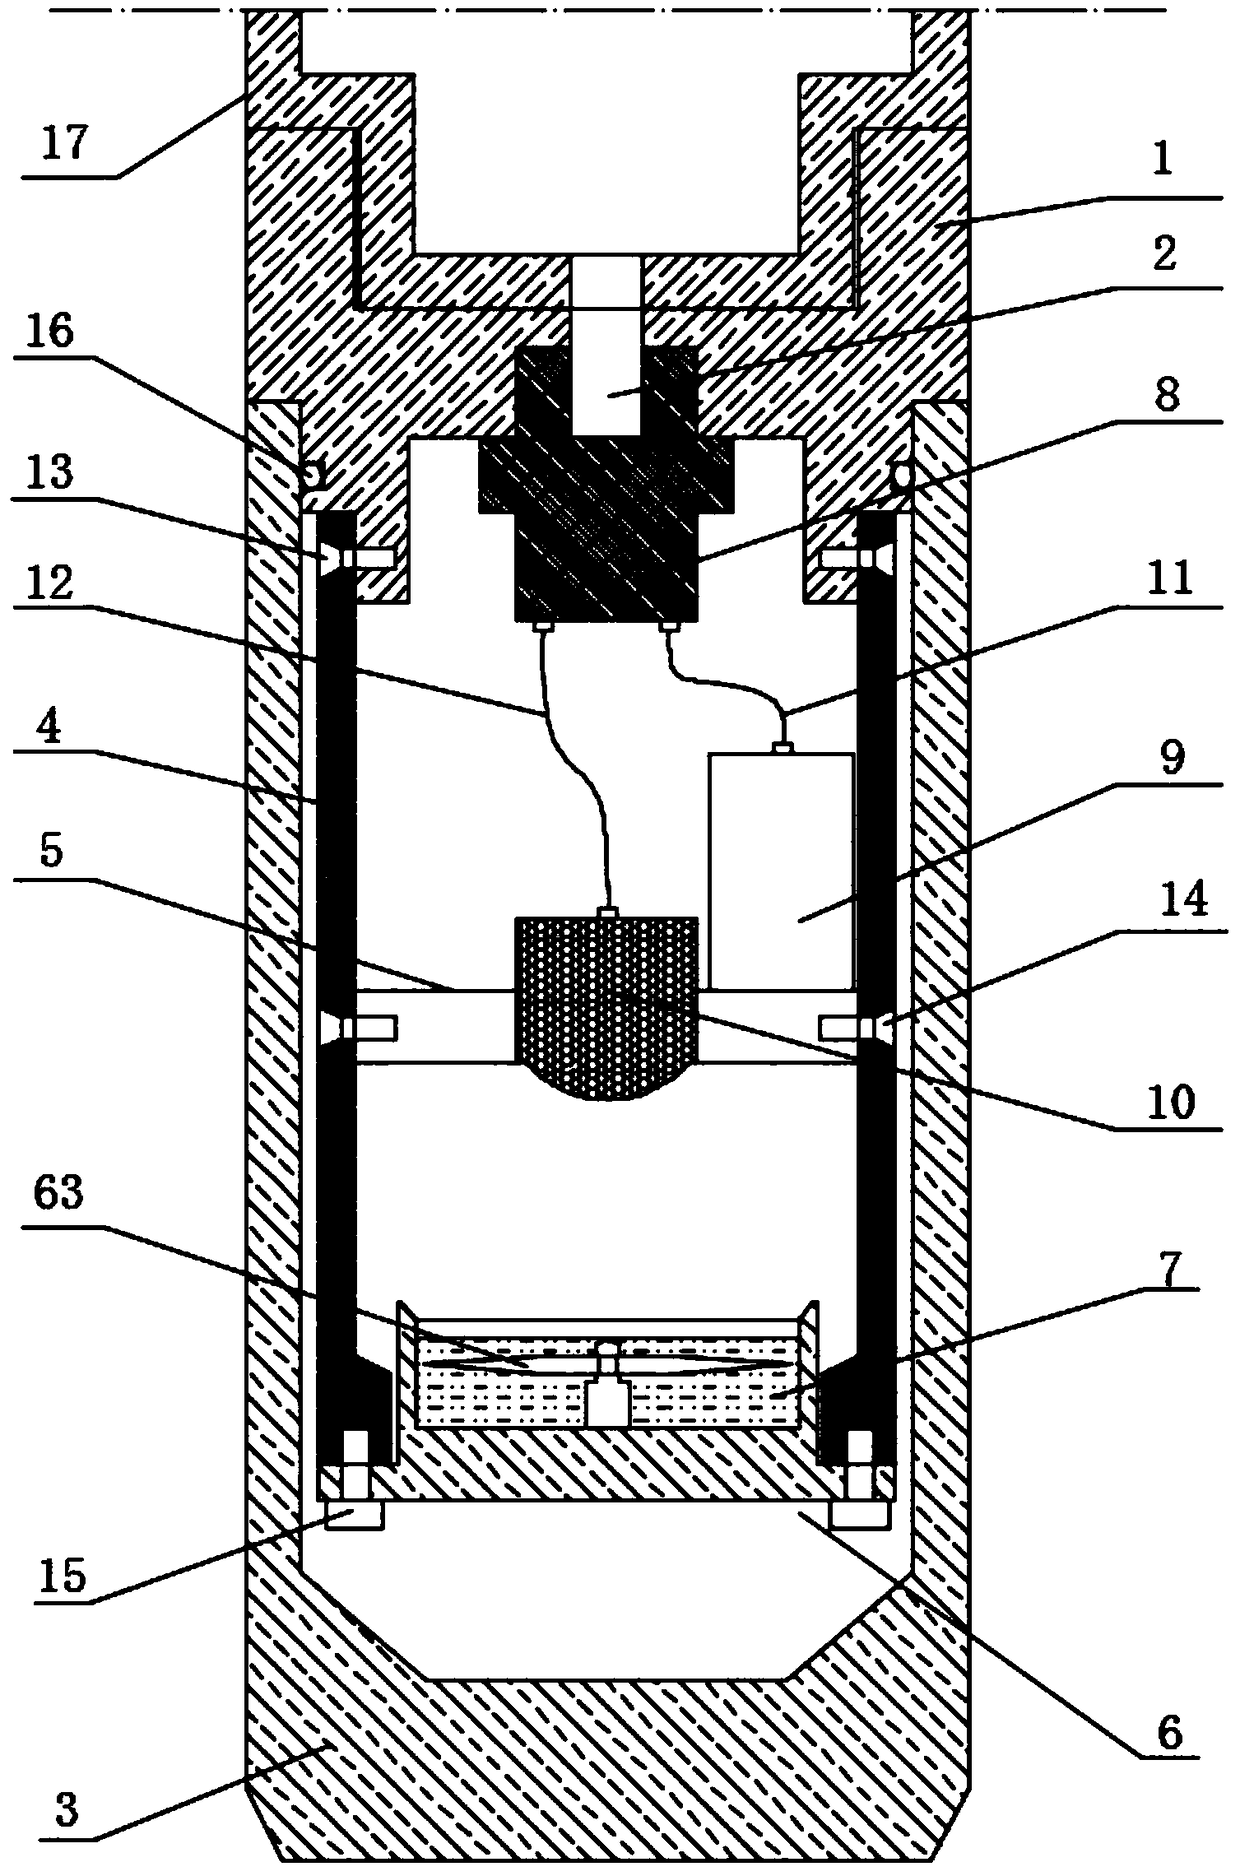 Direction determining device in drilling hole for crustal stress testing according to hydrofracturing method